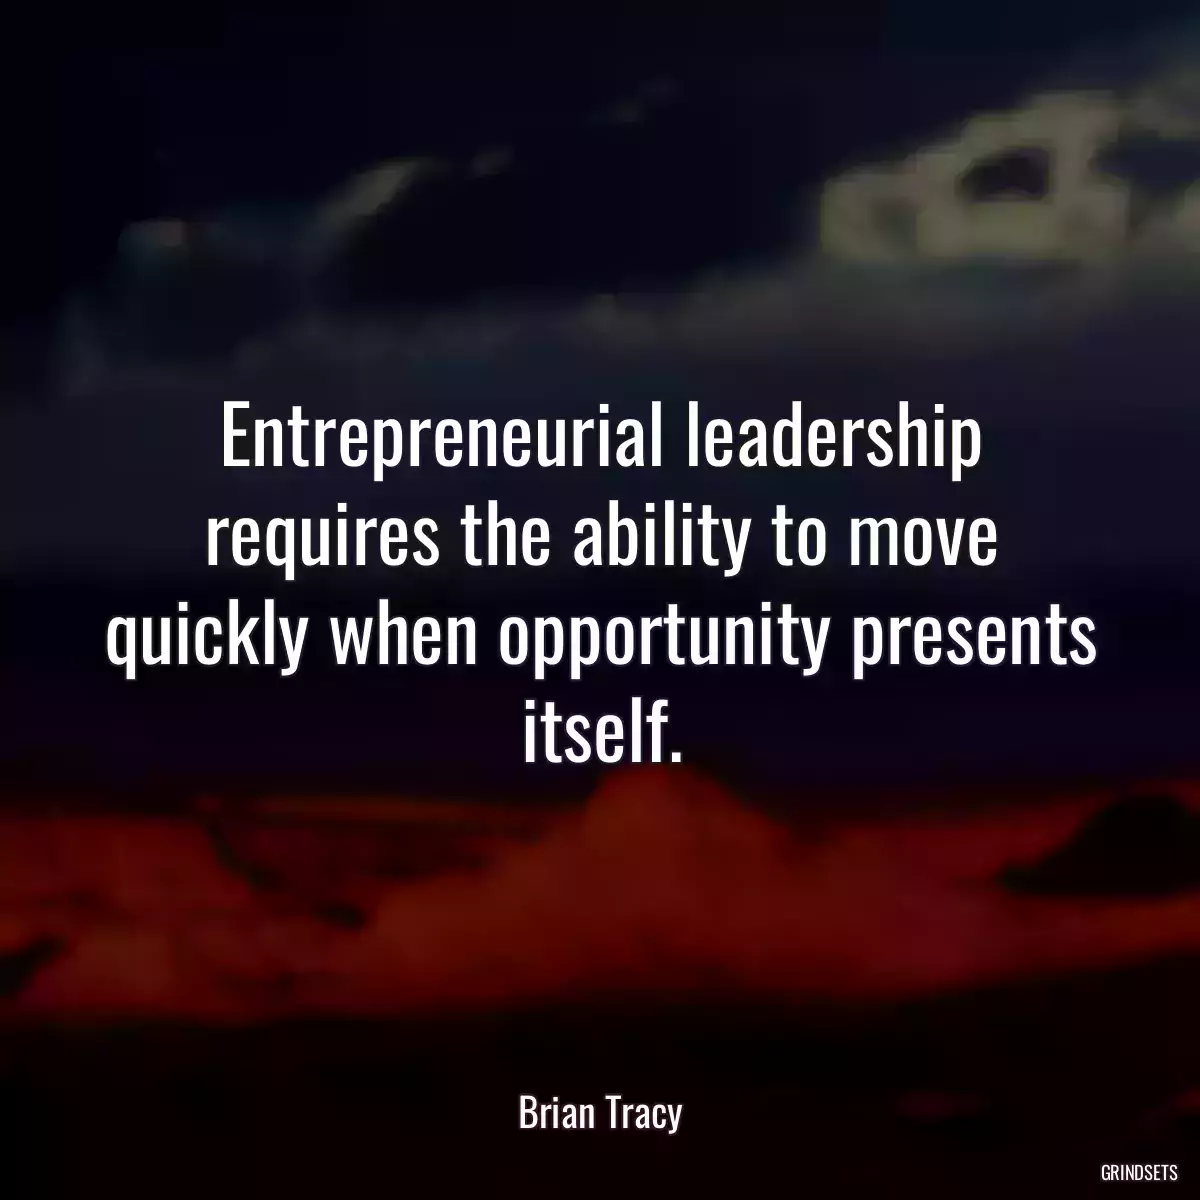 Entrepreneurial leadership requires the ability to move quickly when opportunity presents itself.